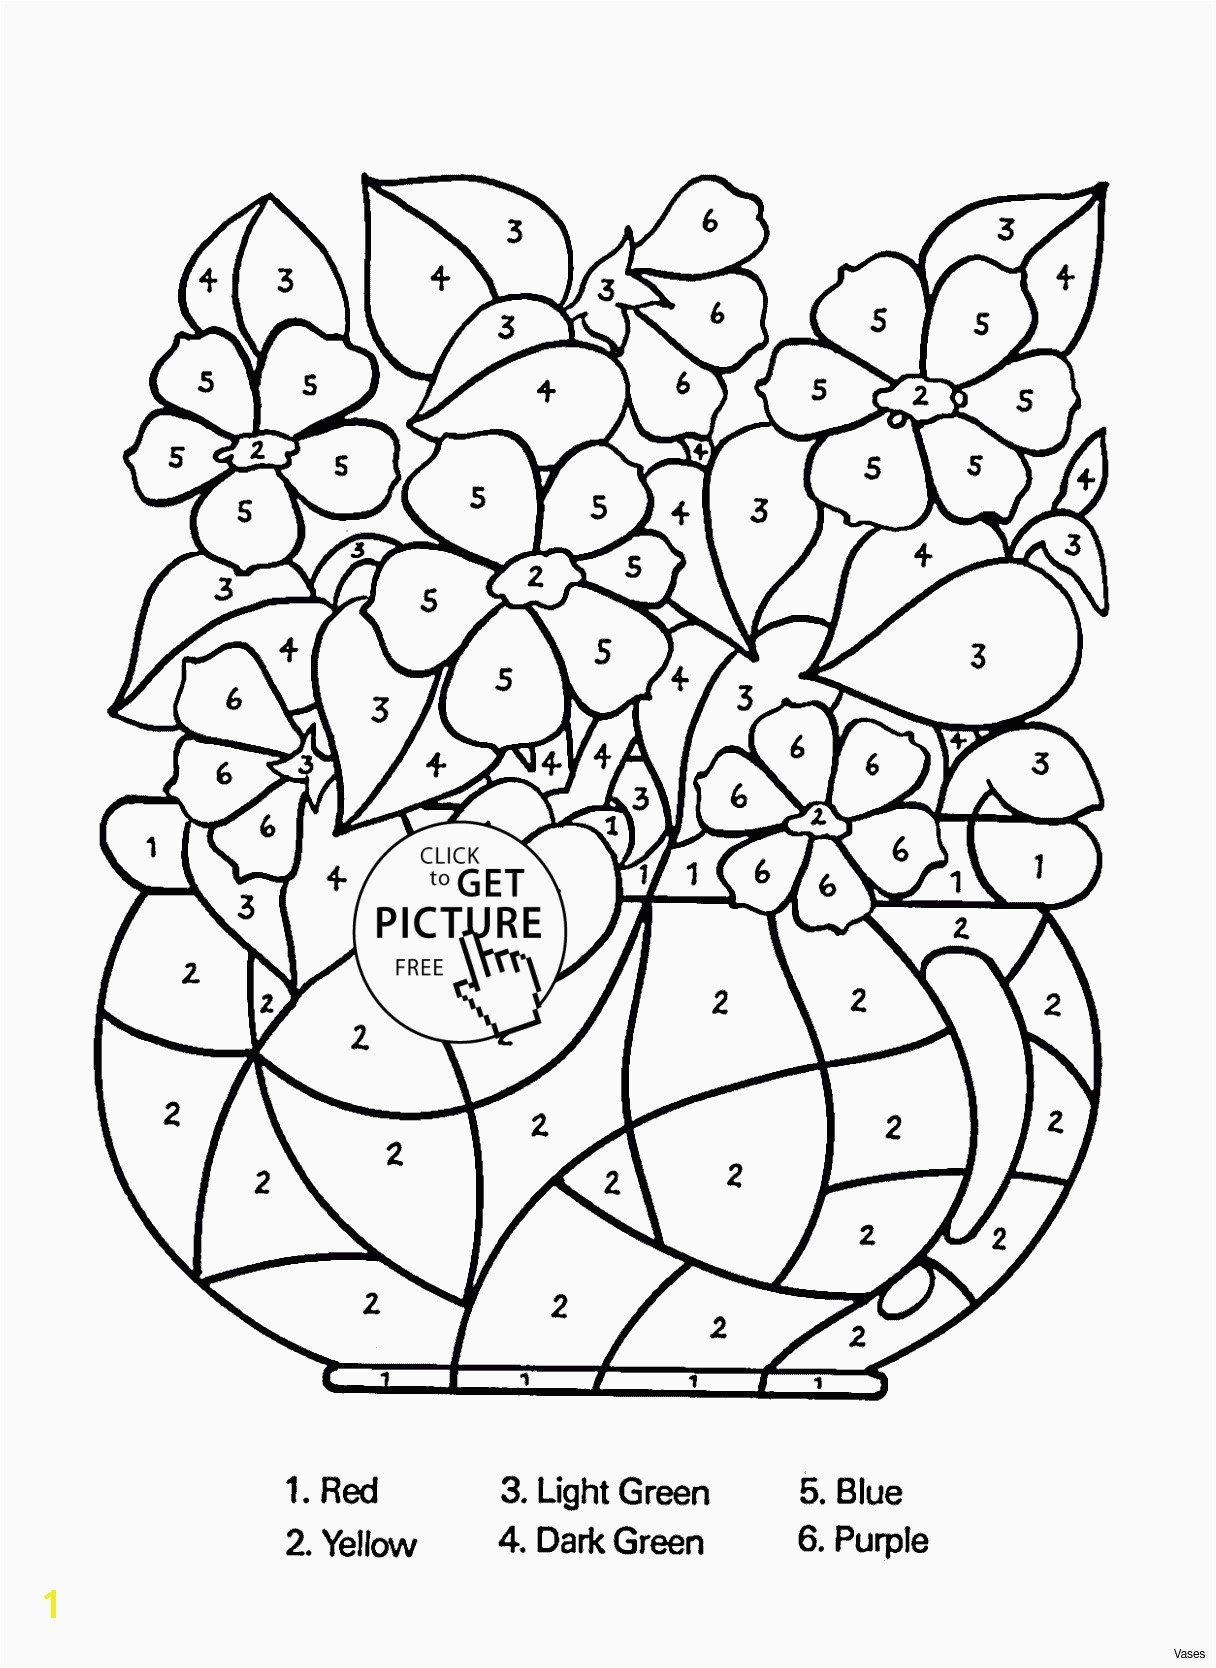 Coloring Pages Of Xylophone Coloring Pages Xylophone Archives Katesgrove